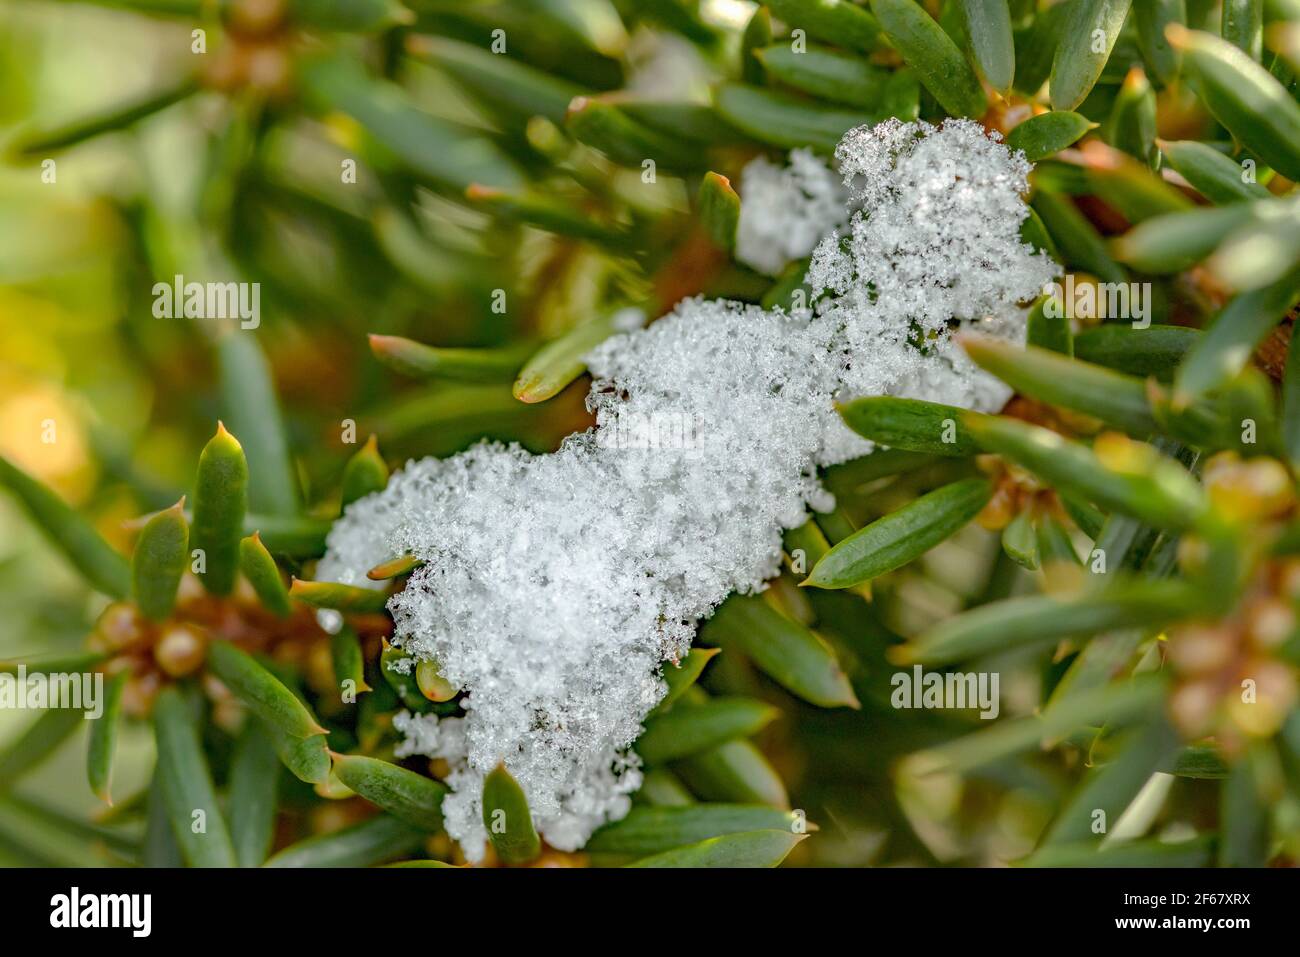 close-up of snow on yew branches with green needles Stock Photo